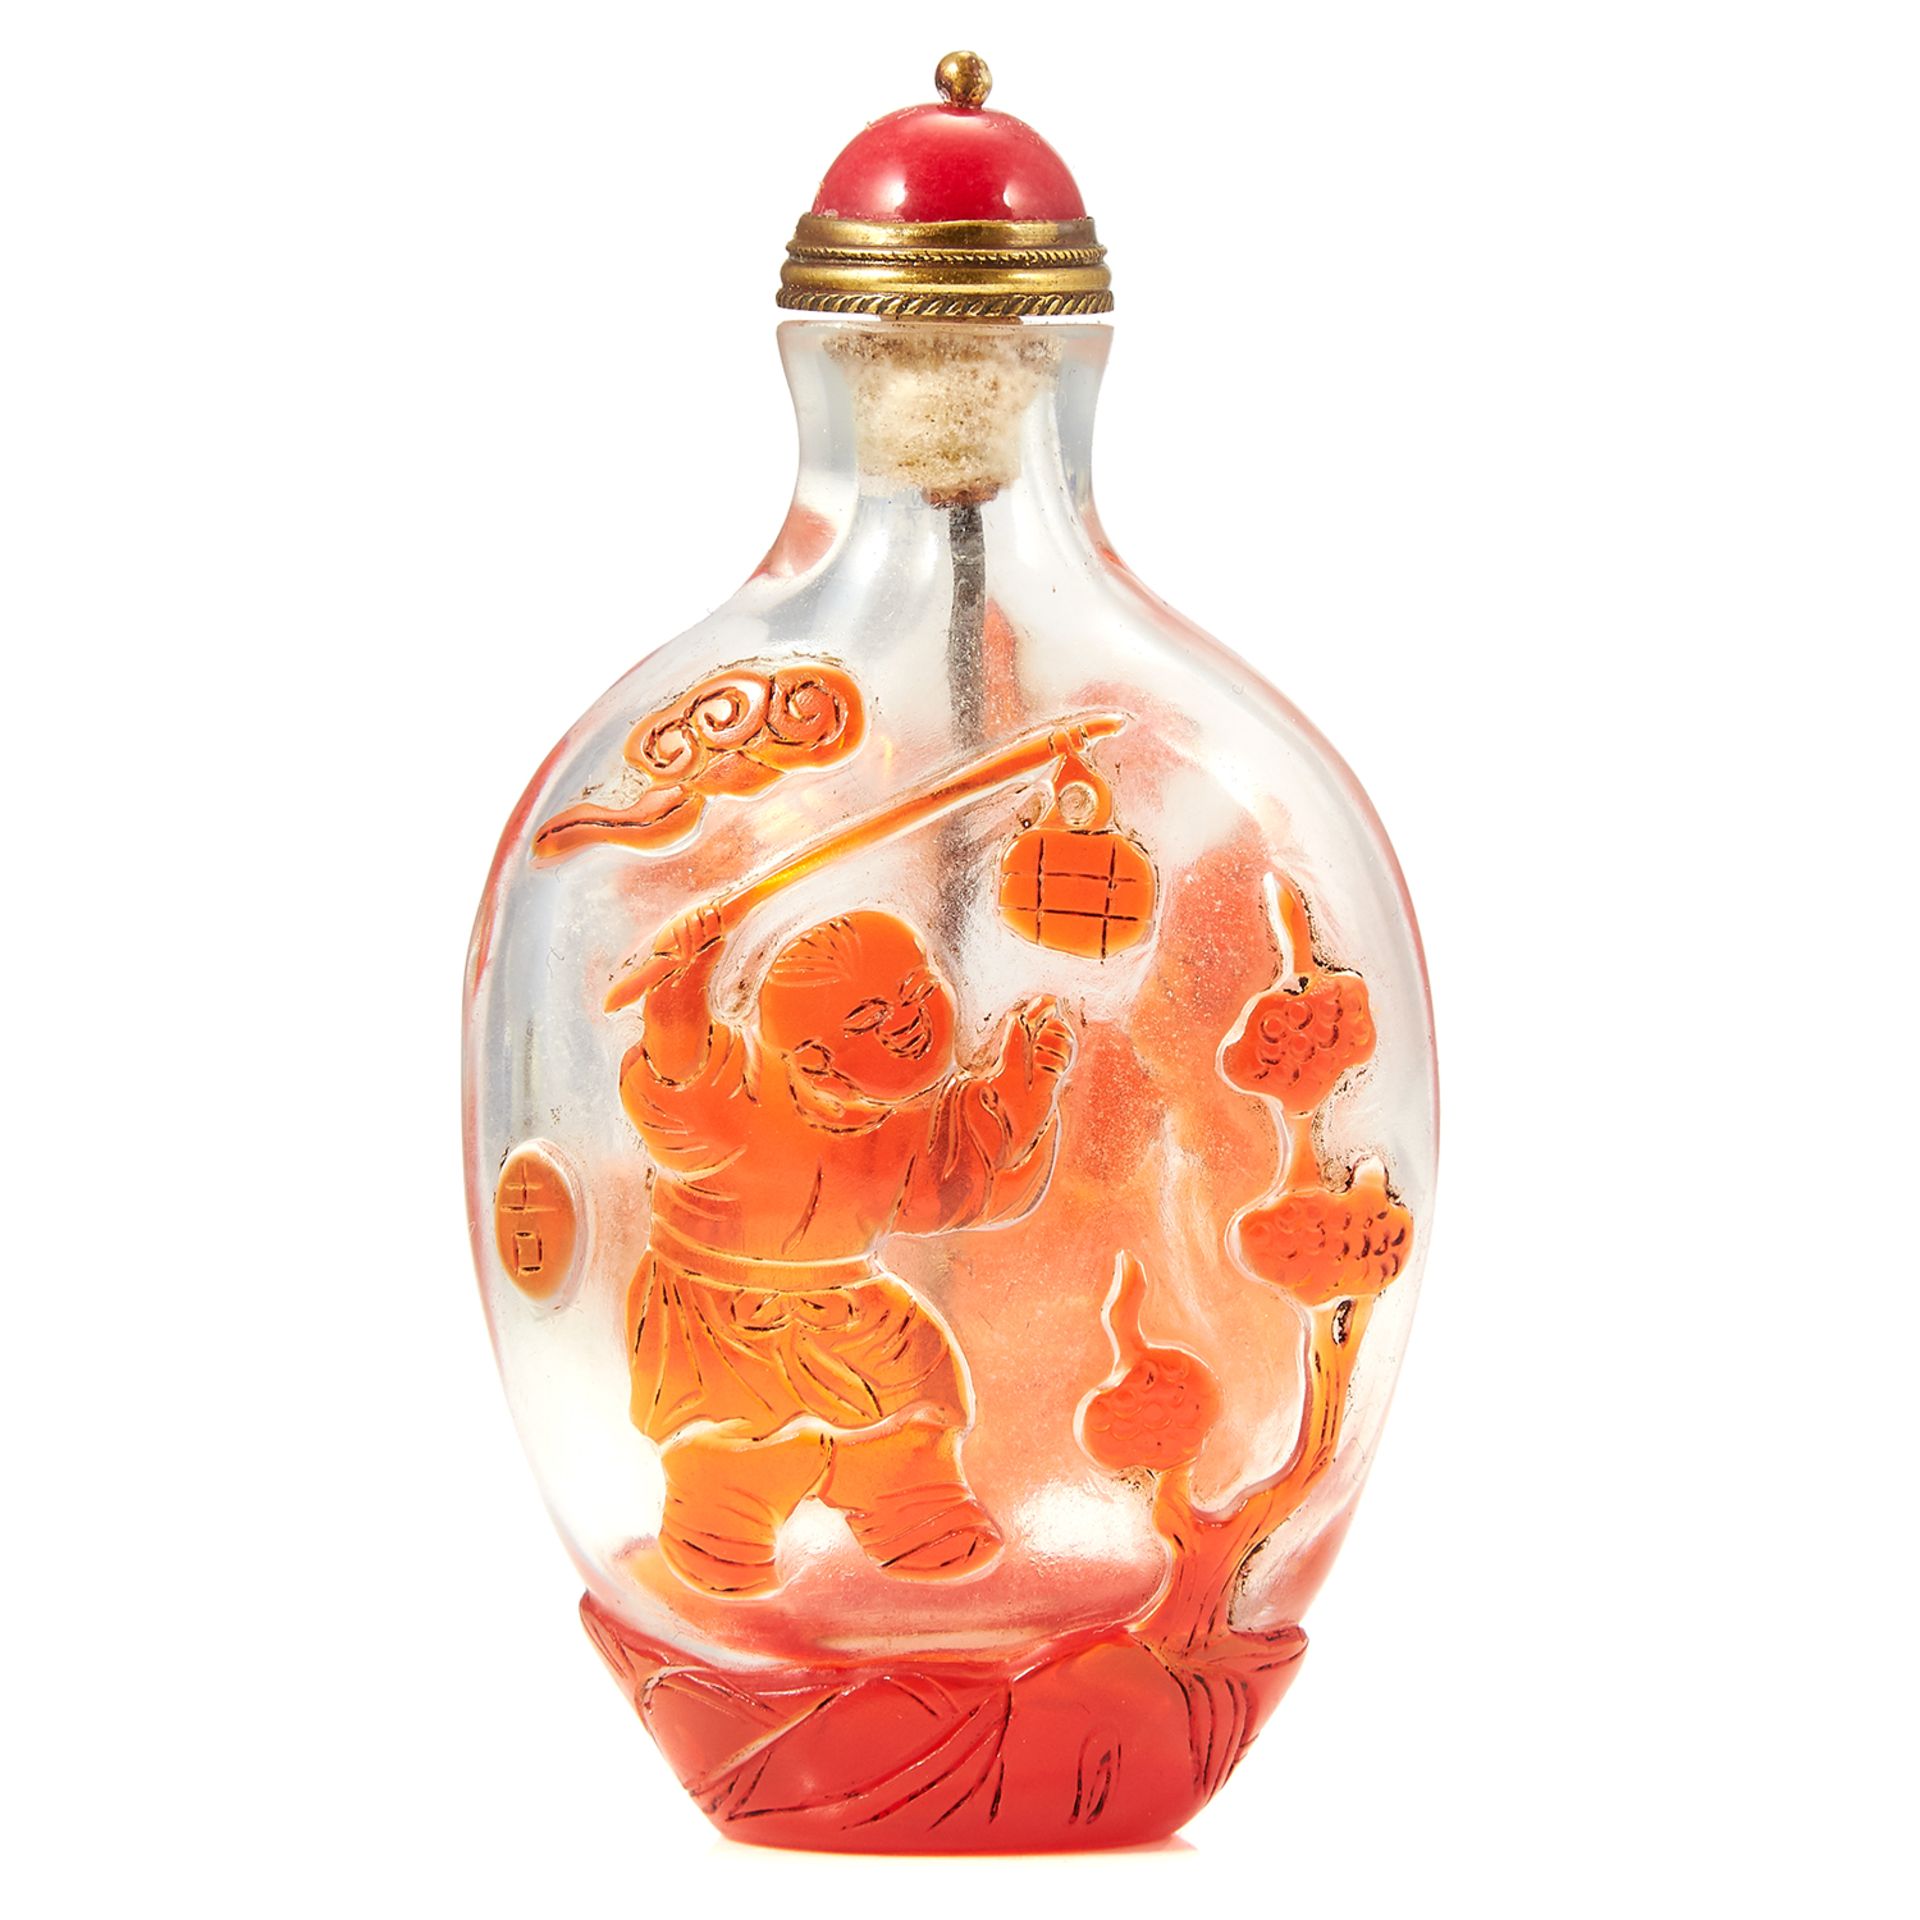 A CHINESE PEKING GLASS SNUFF BOTTLE rounded, decorated in red with traditional scenes, 9.0cm.